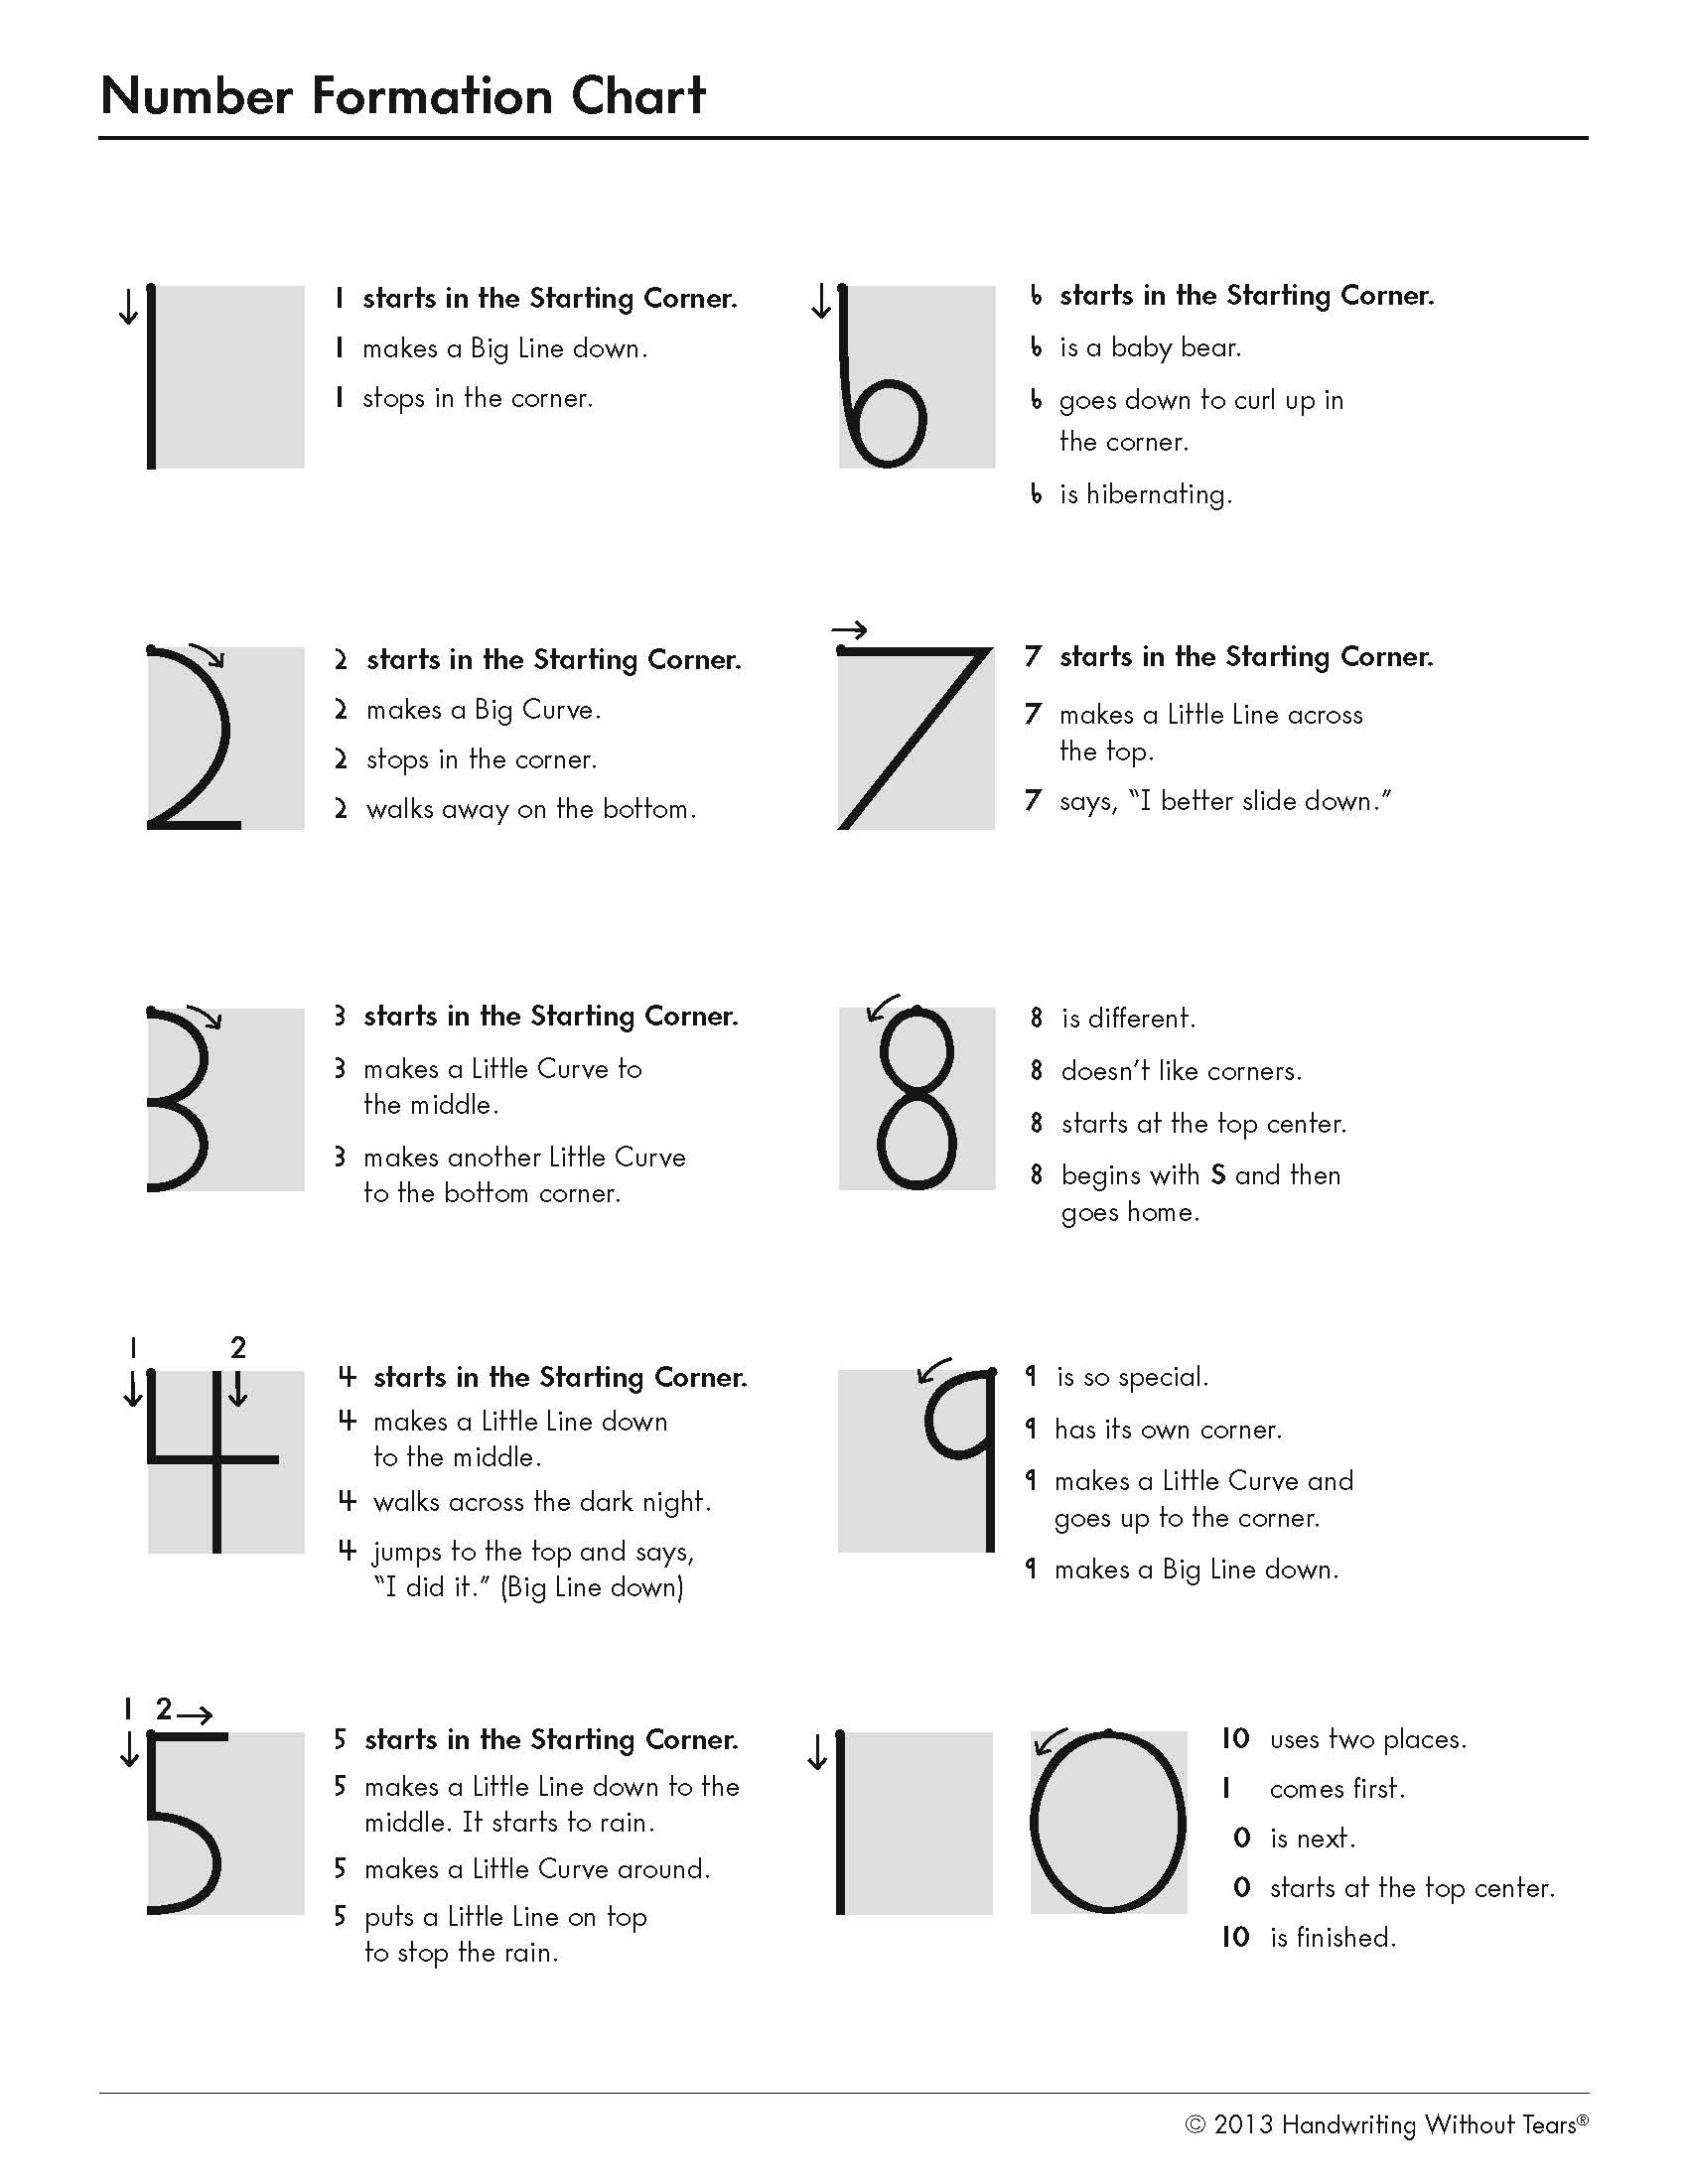 Number Formation Chart